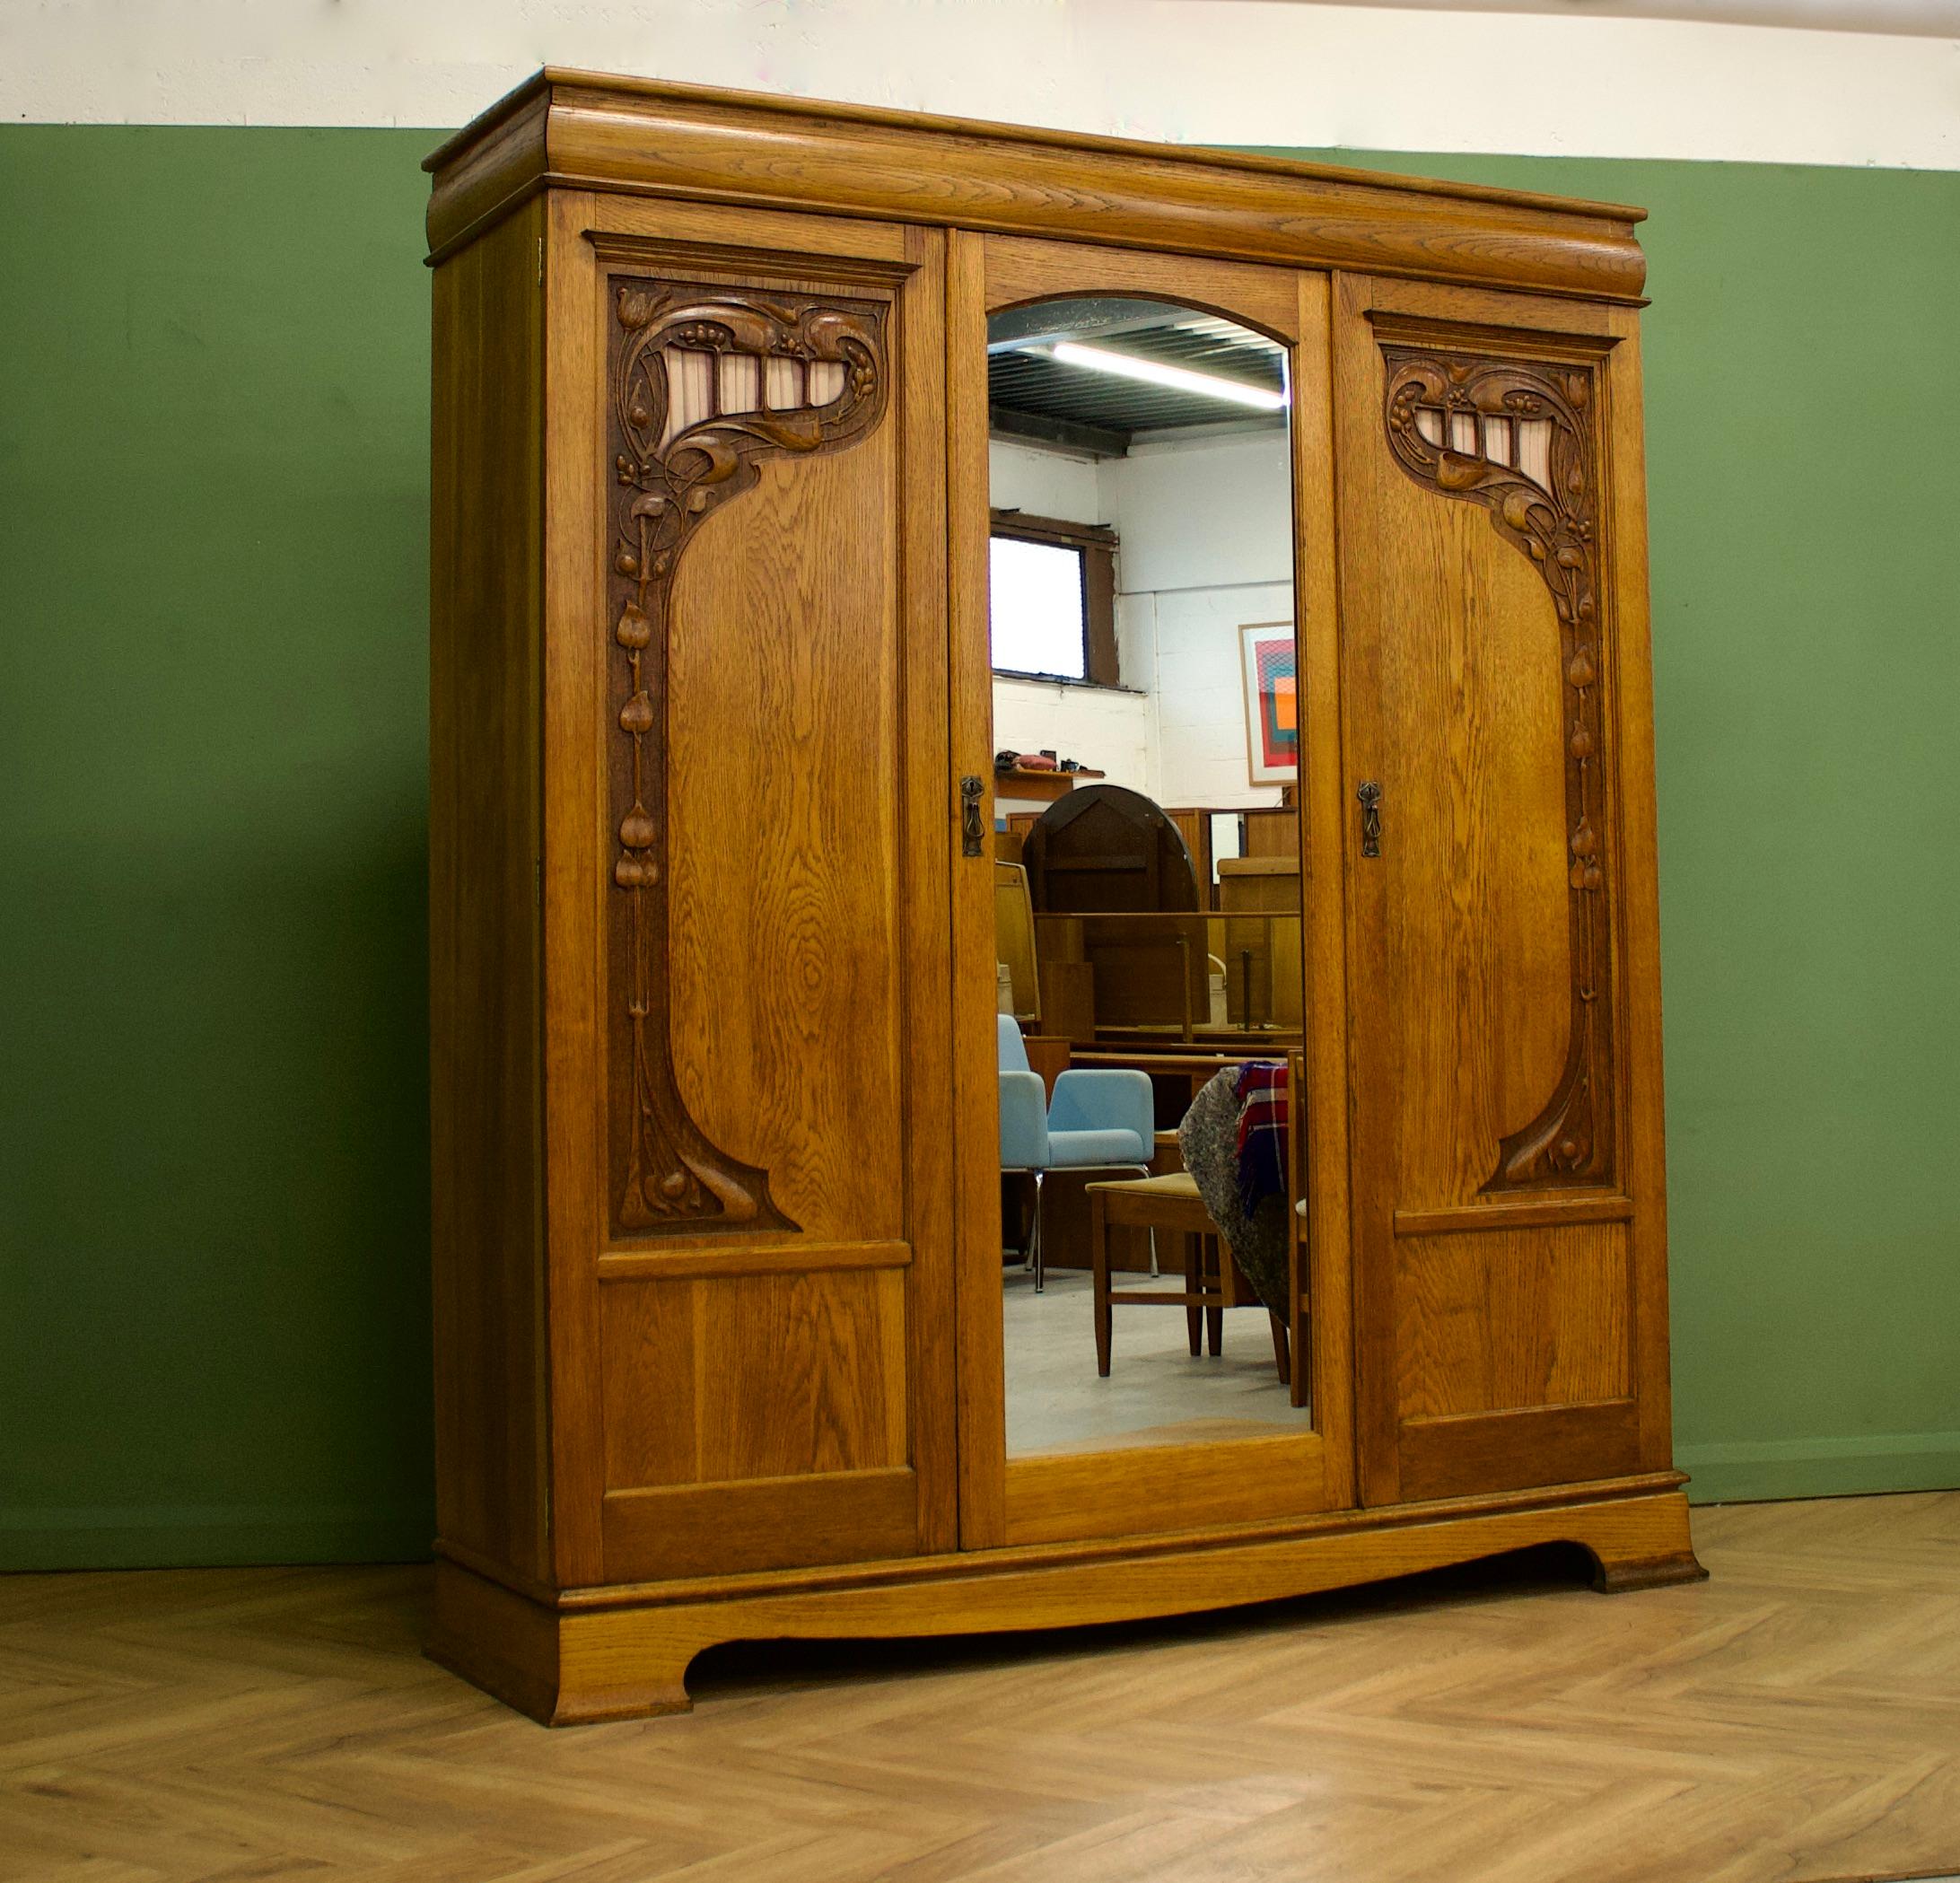 An impressive quality solid oak Art Nouveau wardrobe - circa 1900's


Inside the cupboard has a rail and drawers


There are beautiful hand carved details to each side panel and a full length mirror to the centre door


The wardrobe separates into